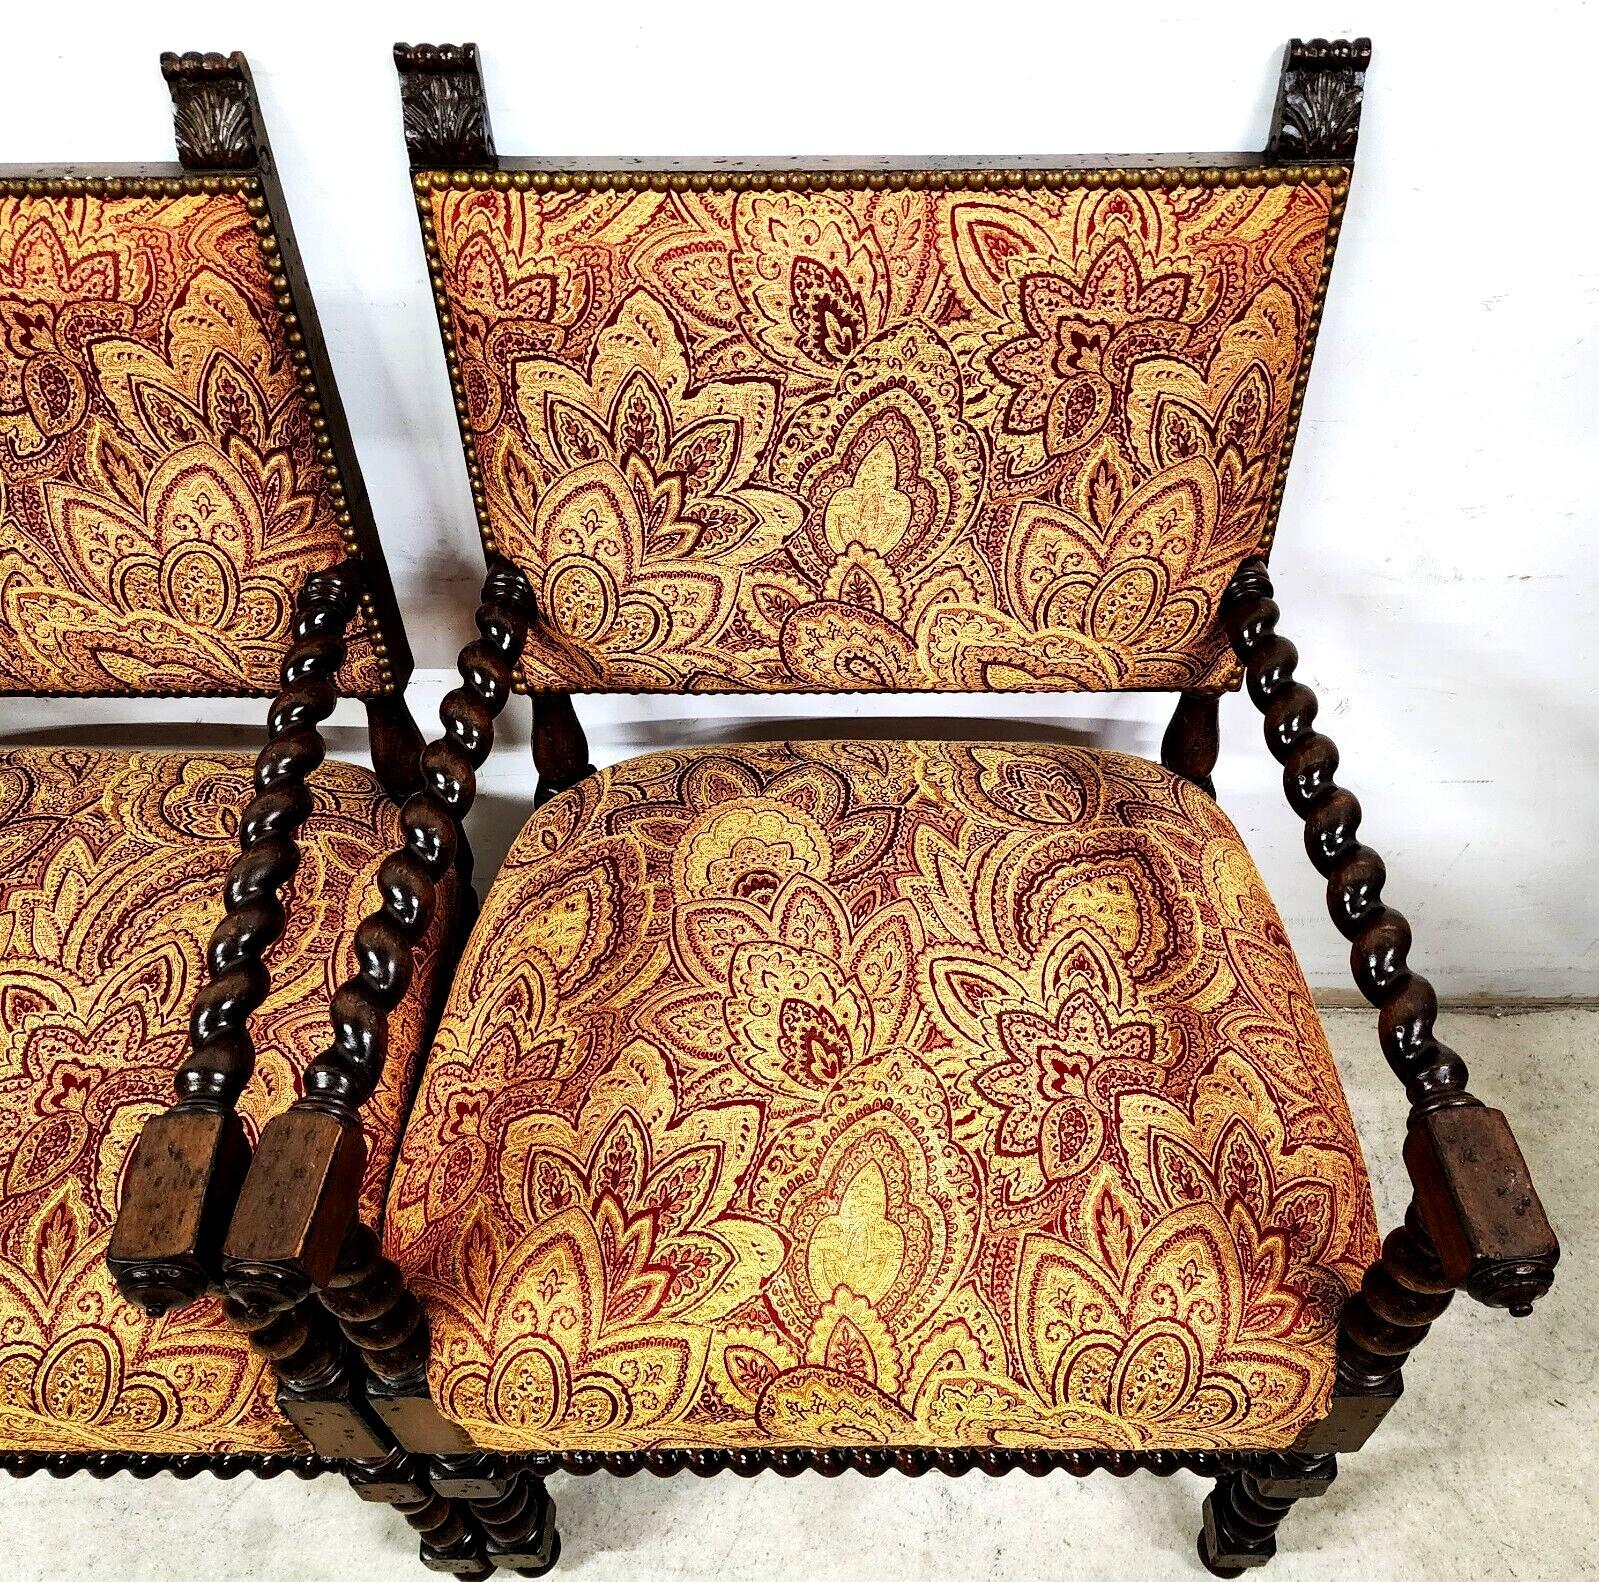 Spanish Revival Armchairs Antique Set of 2 In Good Condition For Sale In Lake Worth, FL